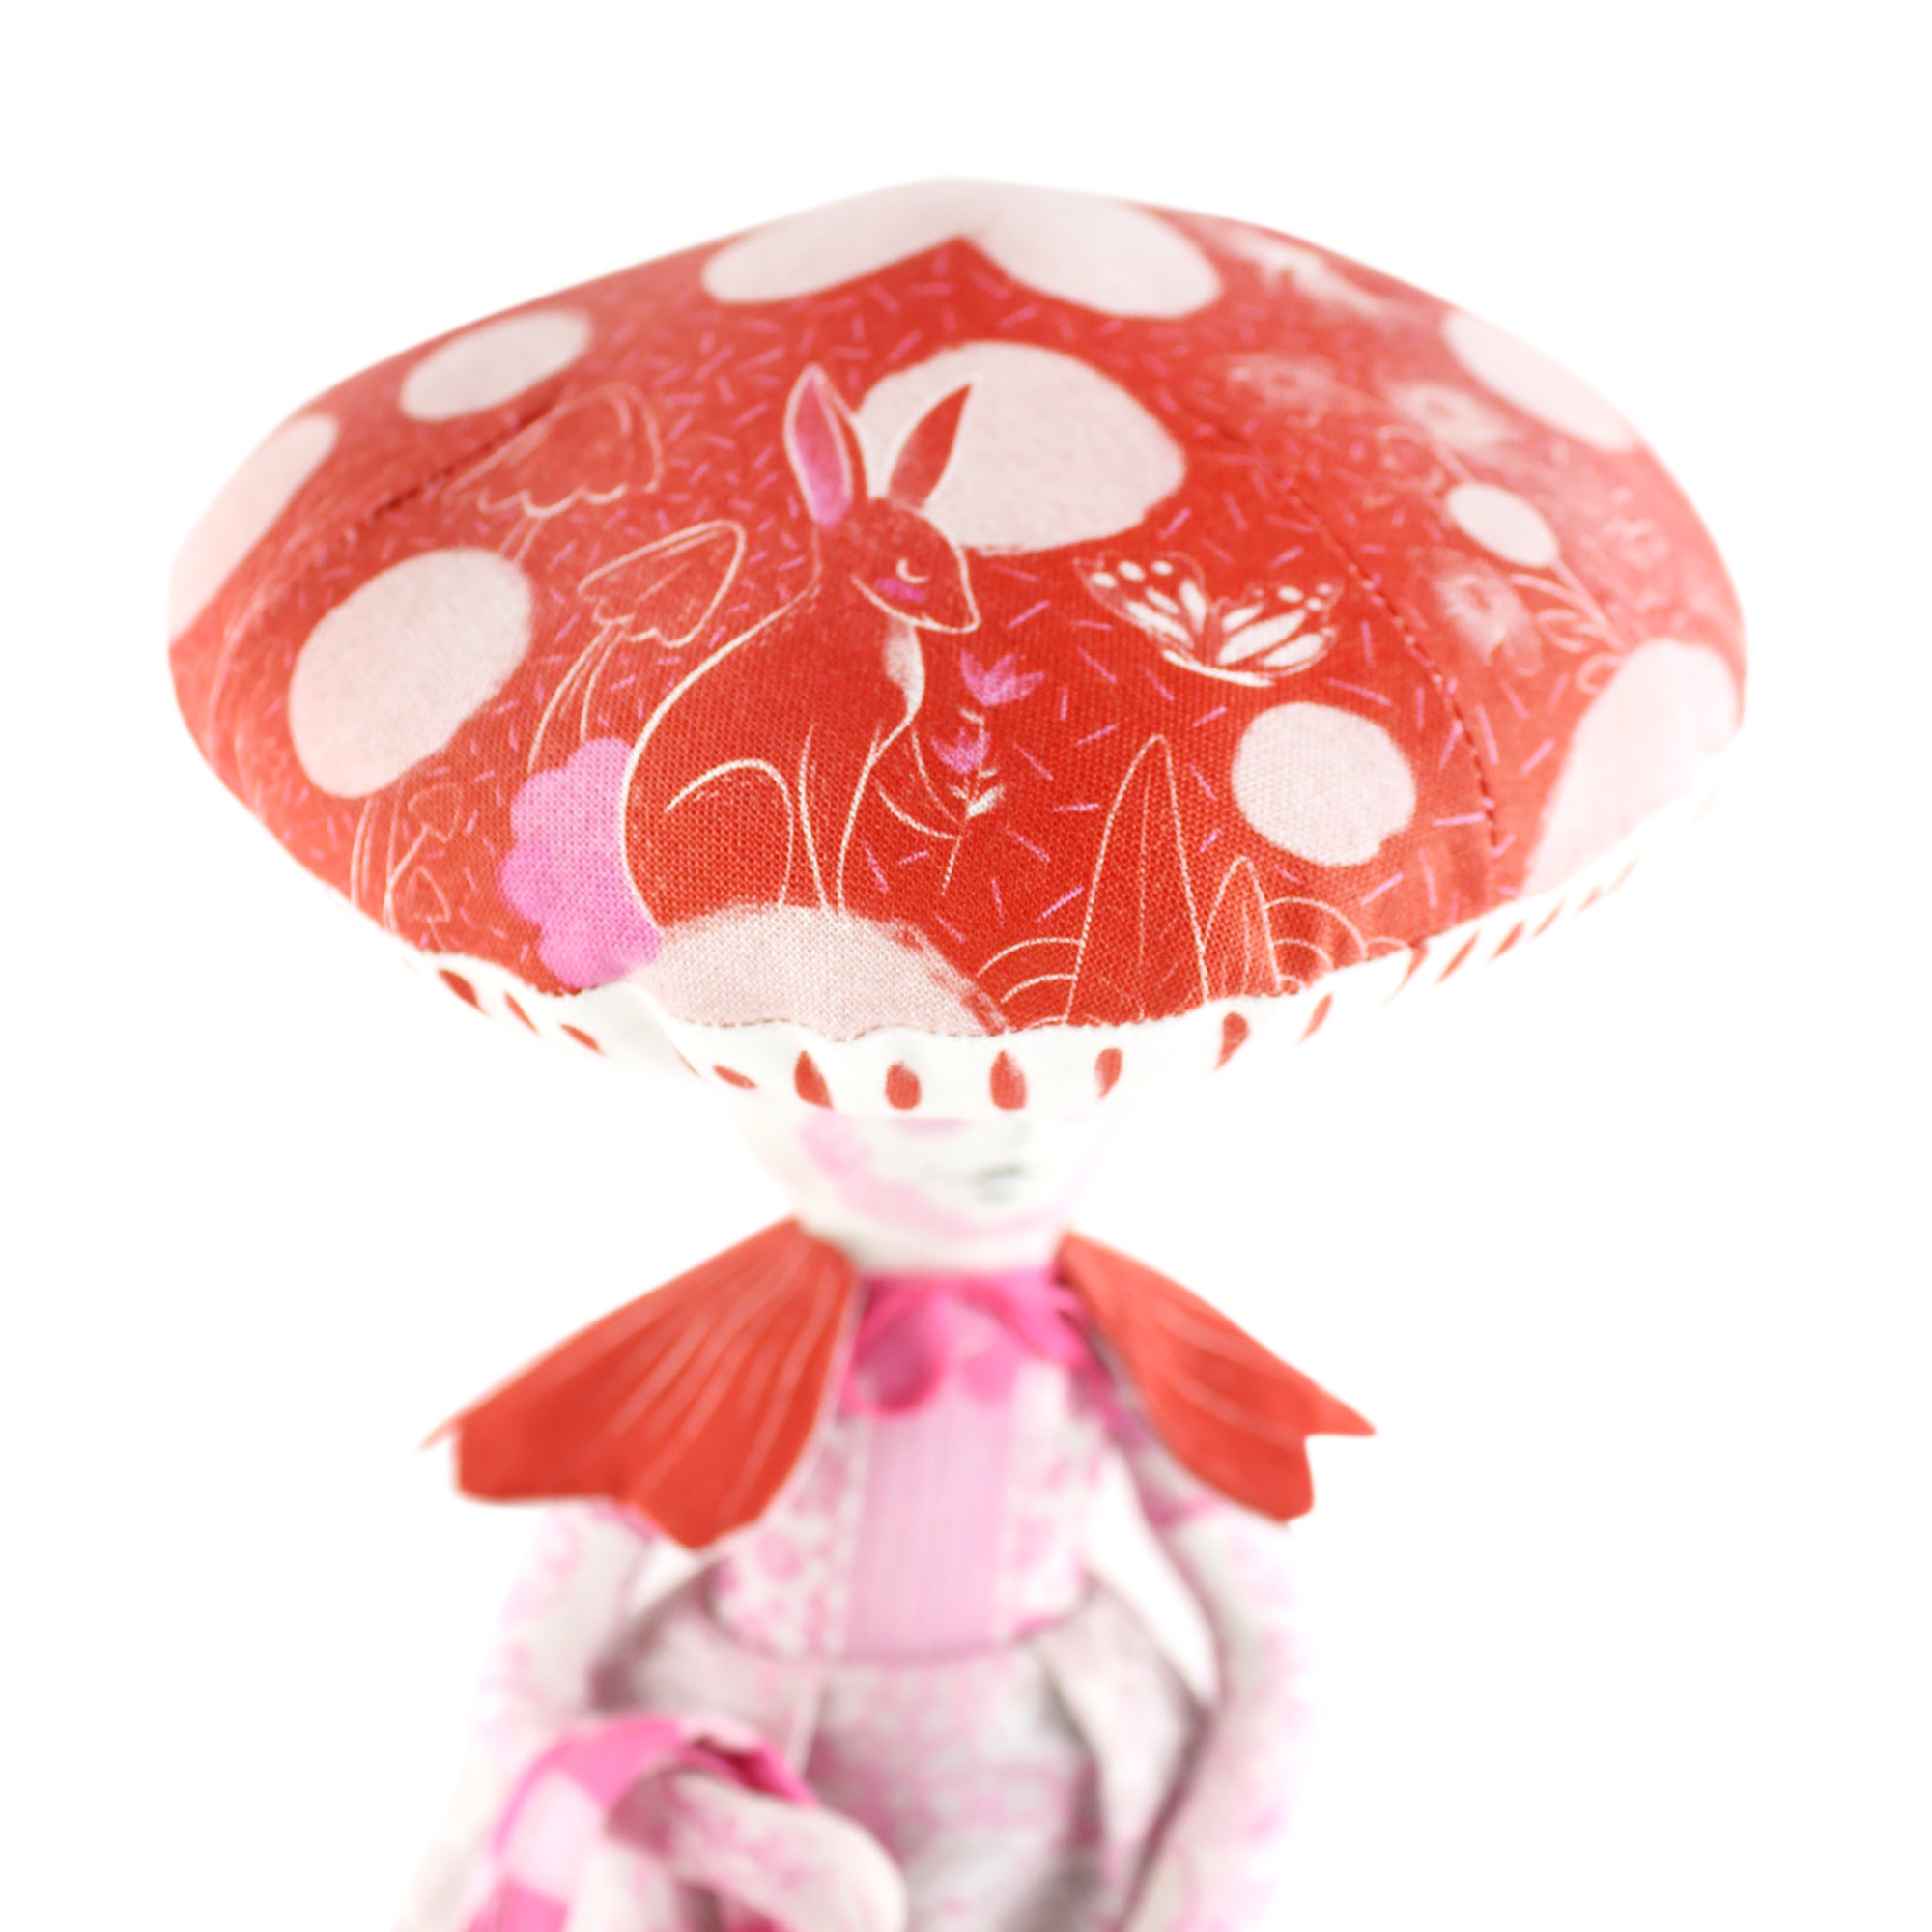 DIY Kit - Patience the Mushroom Girl with 20 Zen cards of hope - FREE UK SHIPPING